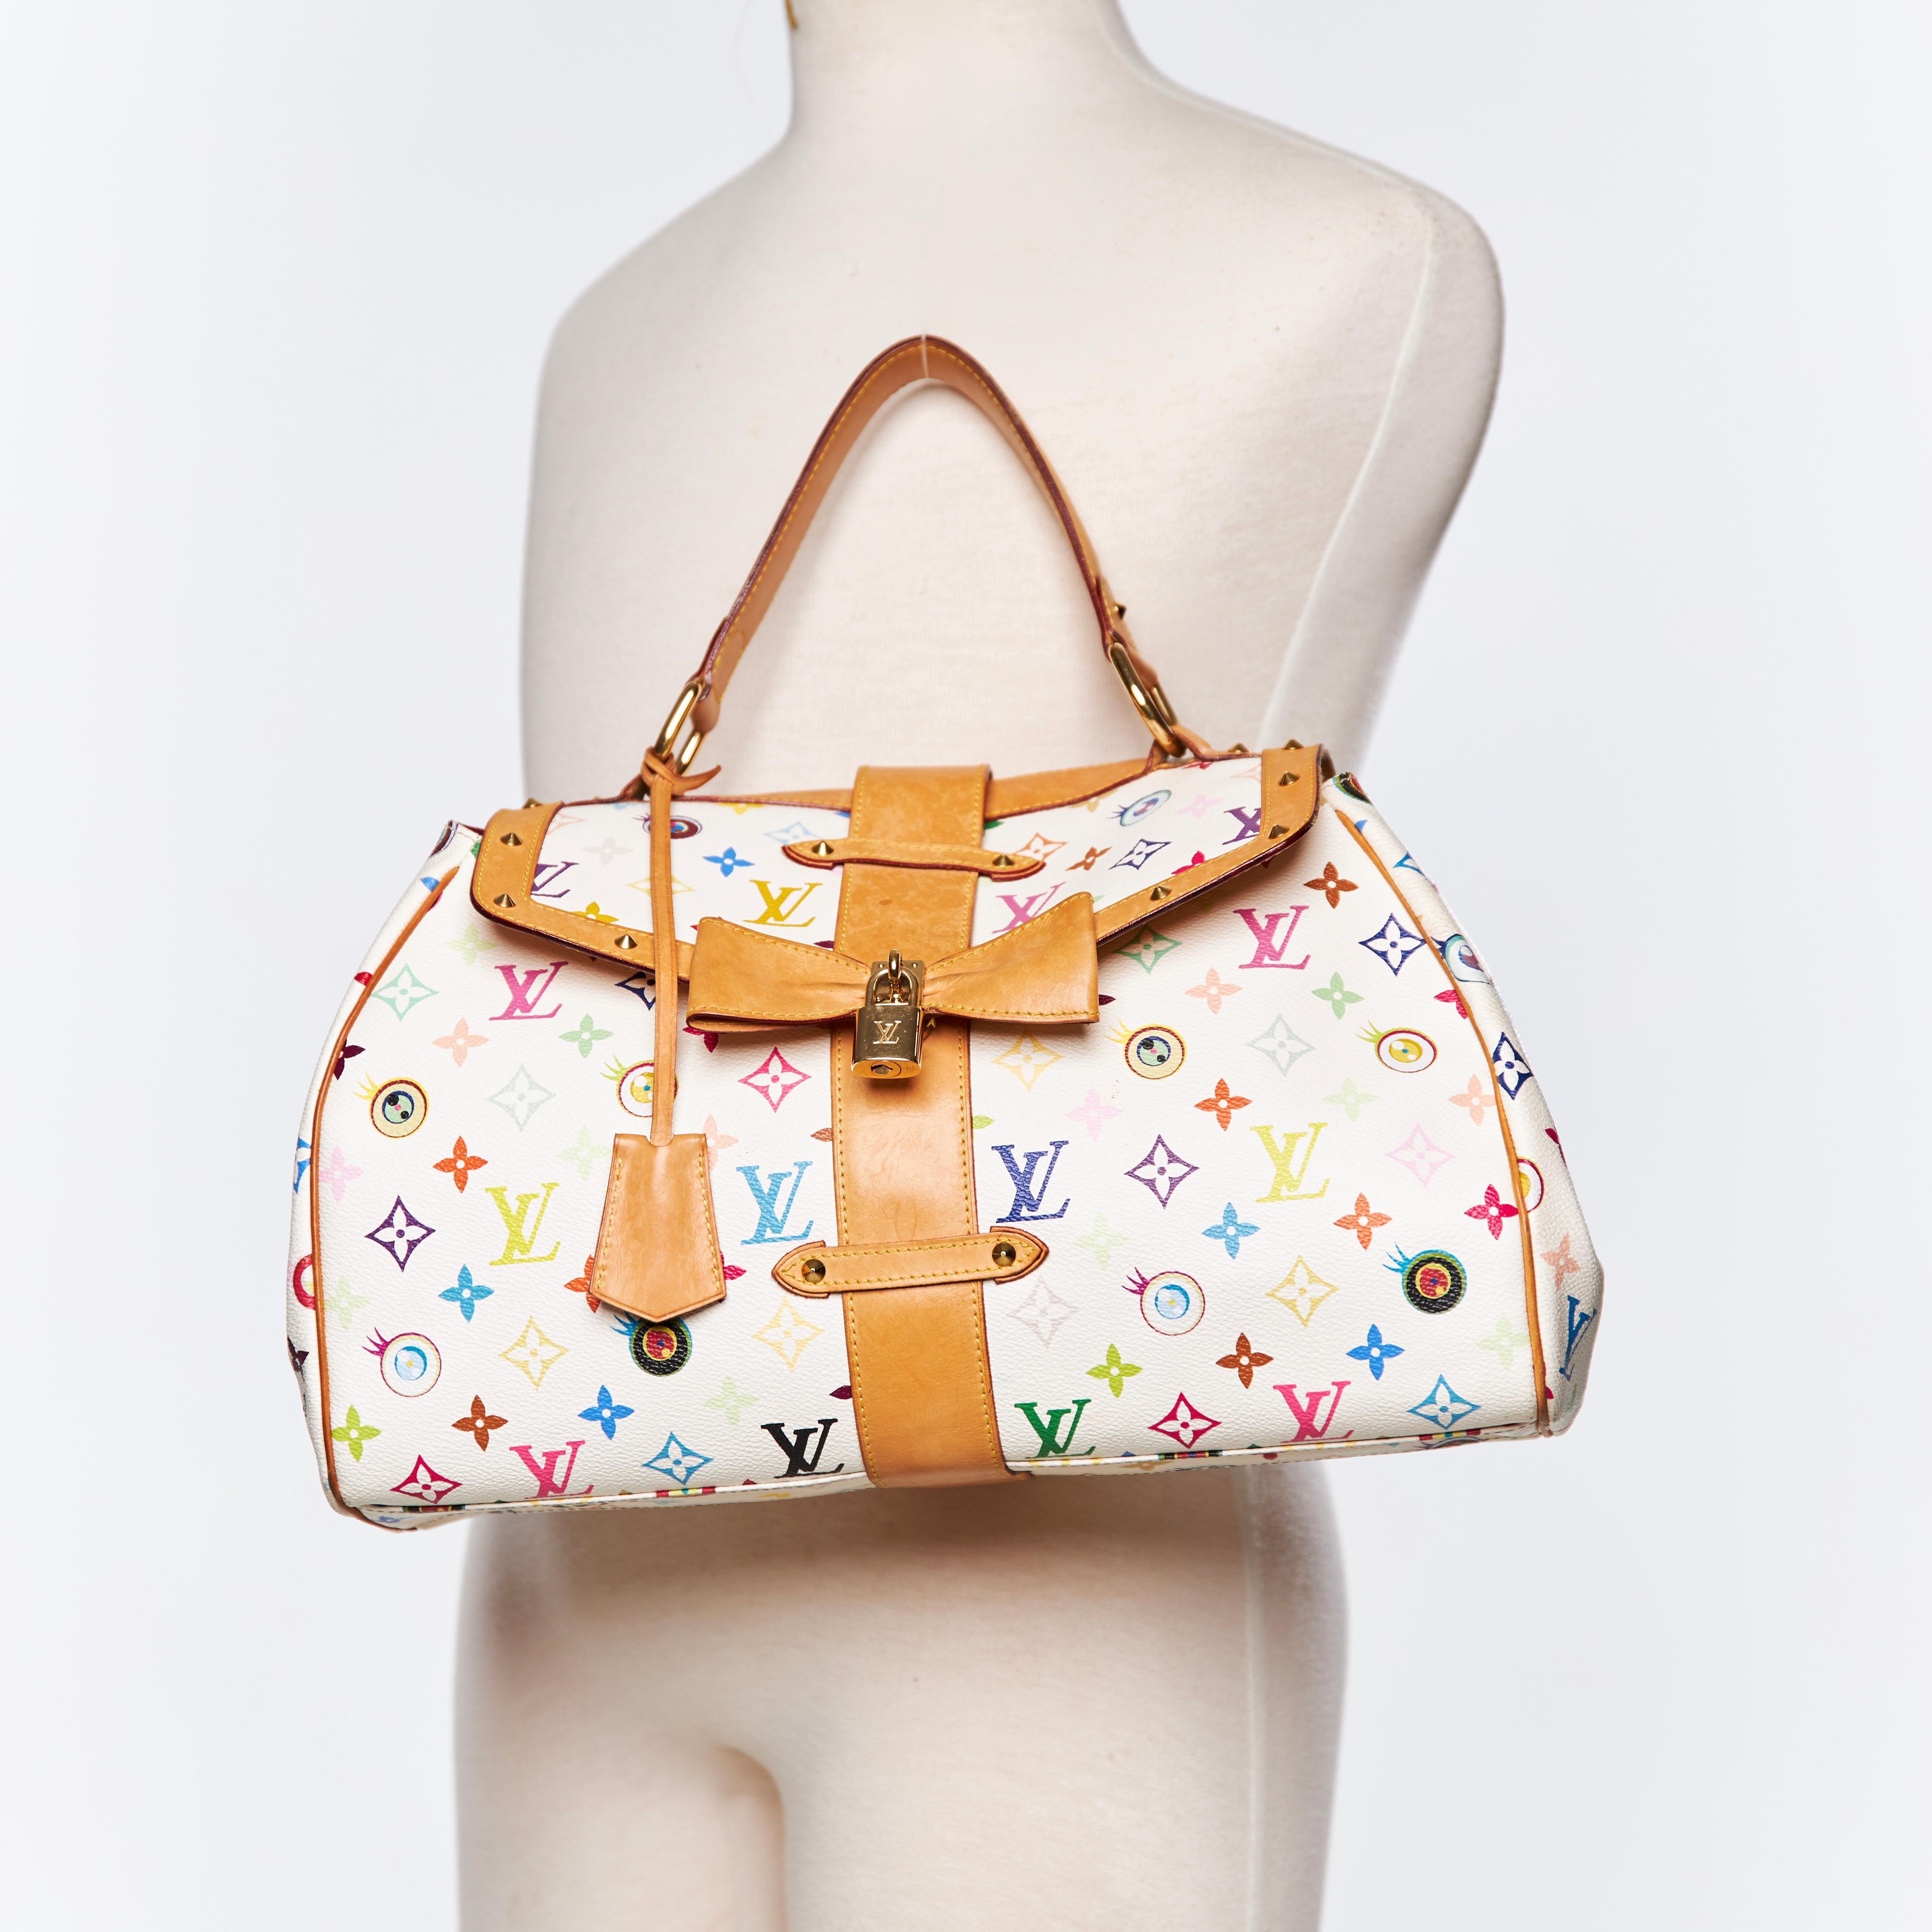 Designed by Takashi Murakami for Louis Vuitton with creative director Marc Jacobs in 2003. Limited production bag, Numbered N°259.

Iconic limited edition collaboration between artist Takashi Murakami and Louis Vuitton with creative director Marc